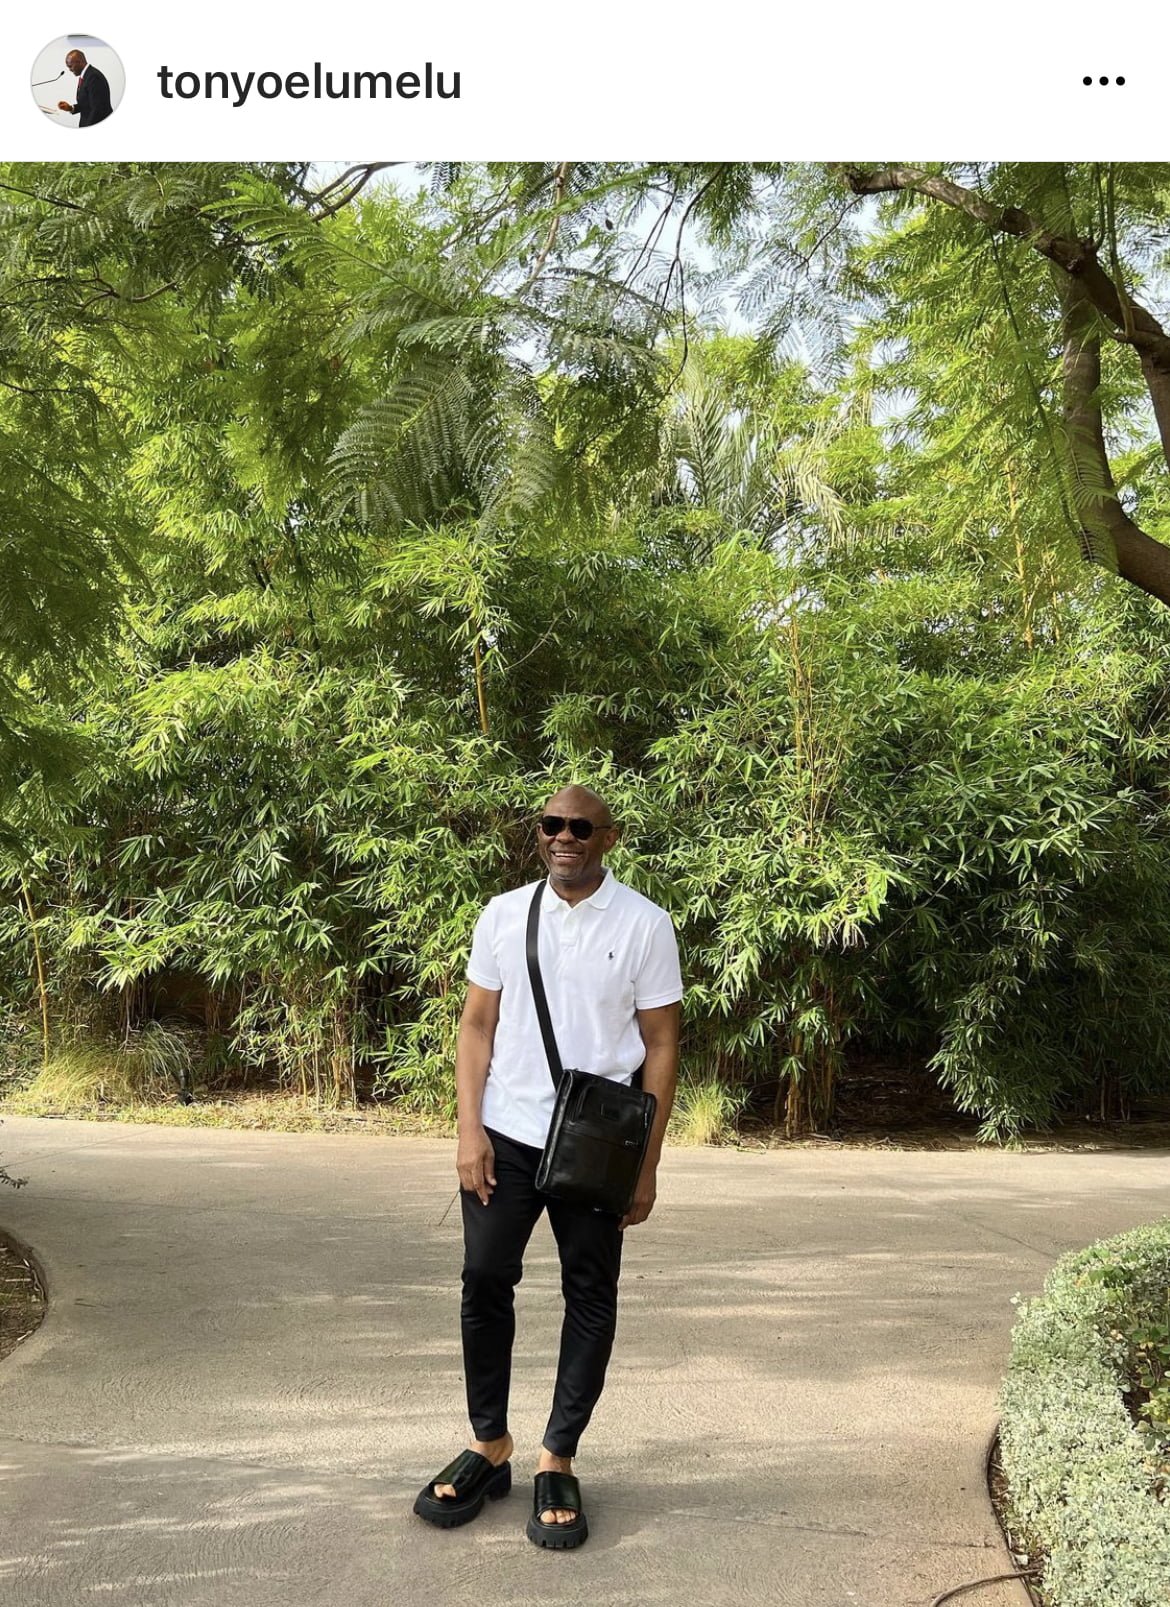 'What Kind of Yahoo Boy Dressing Is This' - Fans Tackle Billionaire Tony Elumelu Over His Outfit [Photos]